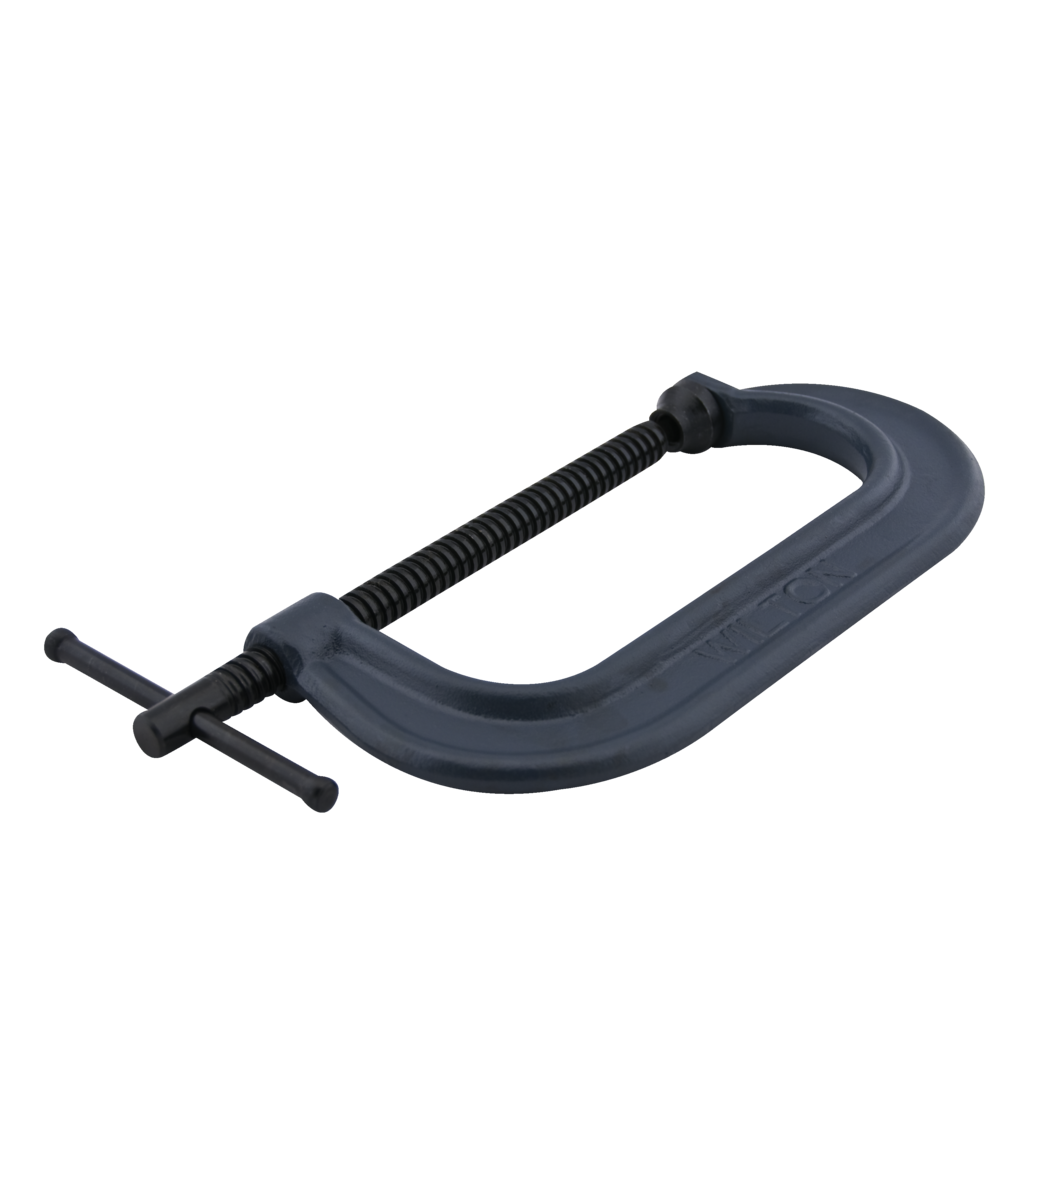 WILTON 800 Series Standard Depth Drop Forged C-Clamp, 0 -3” Opening, 1-15/16” Throat